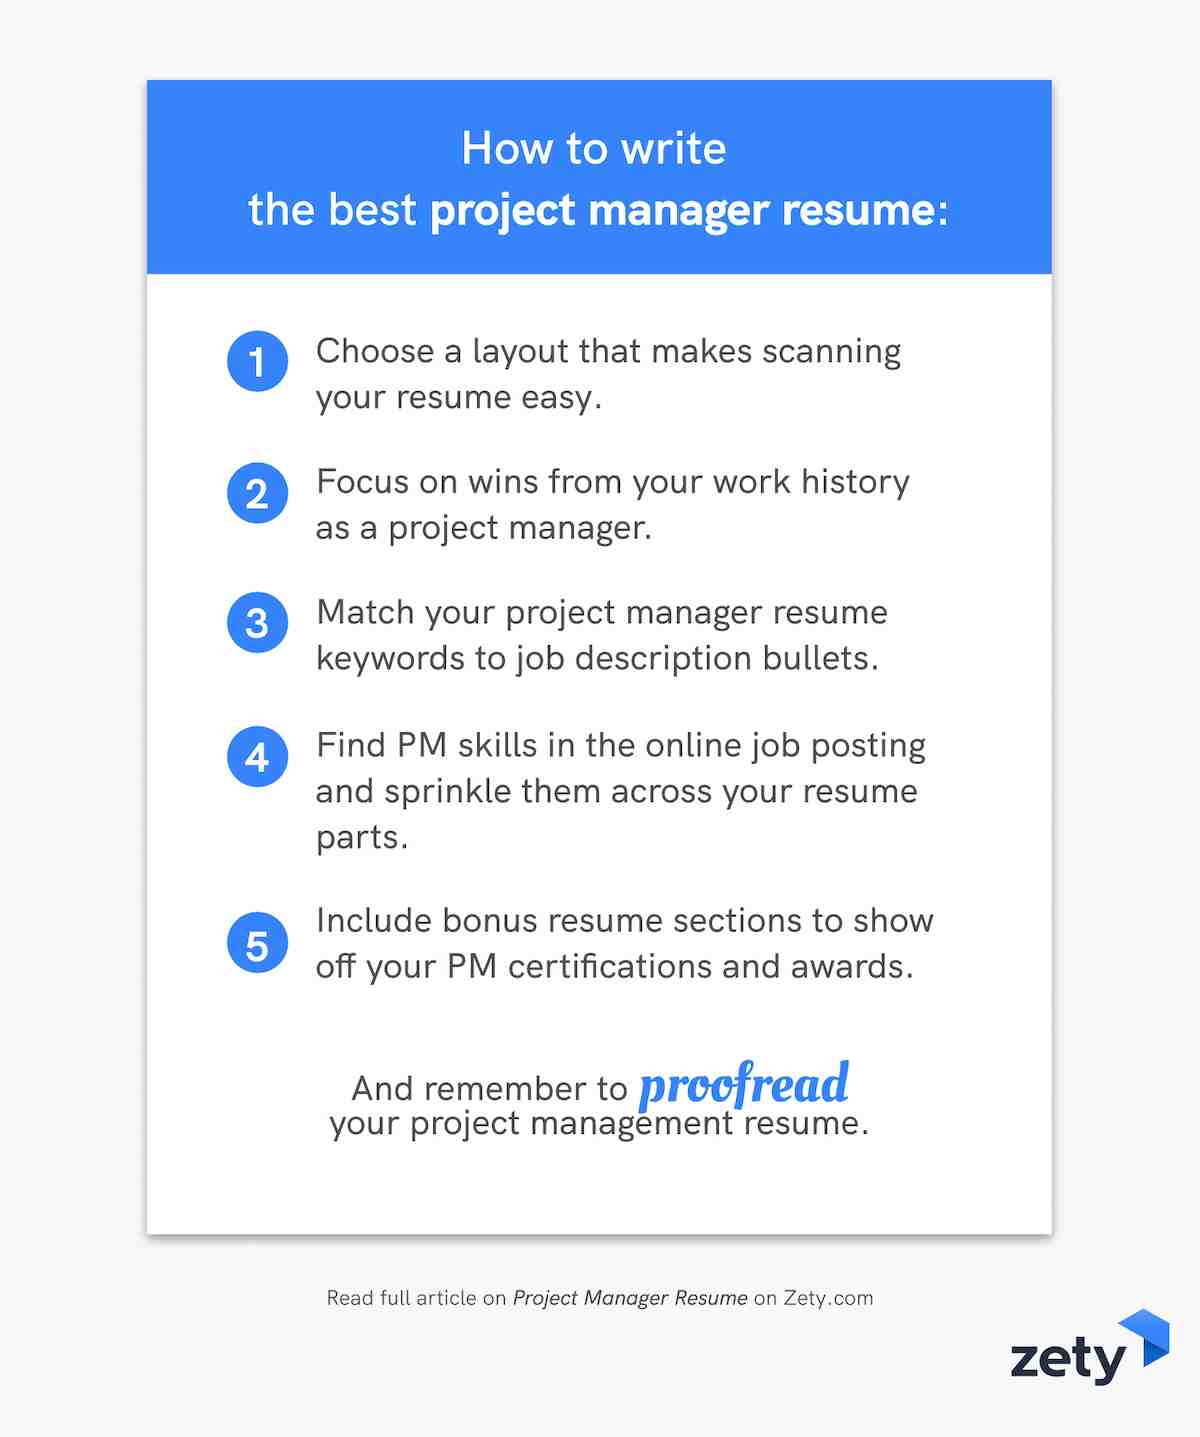 How to write the best project manager resume